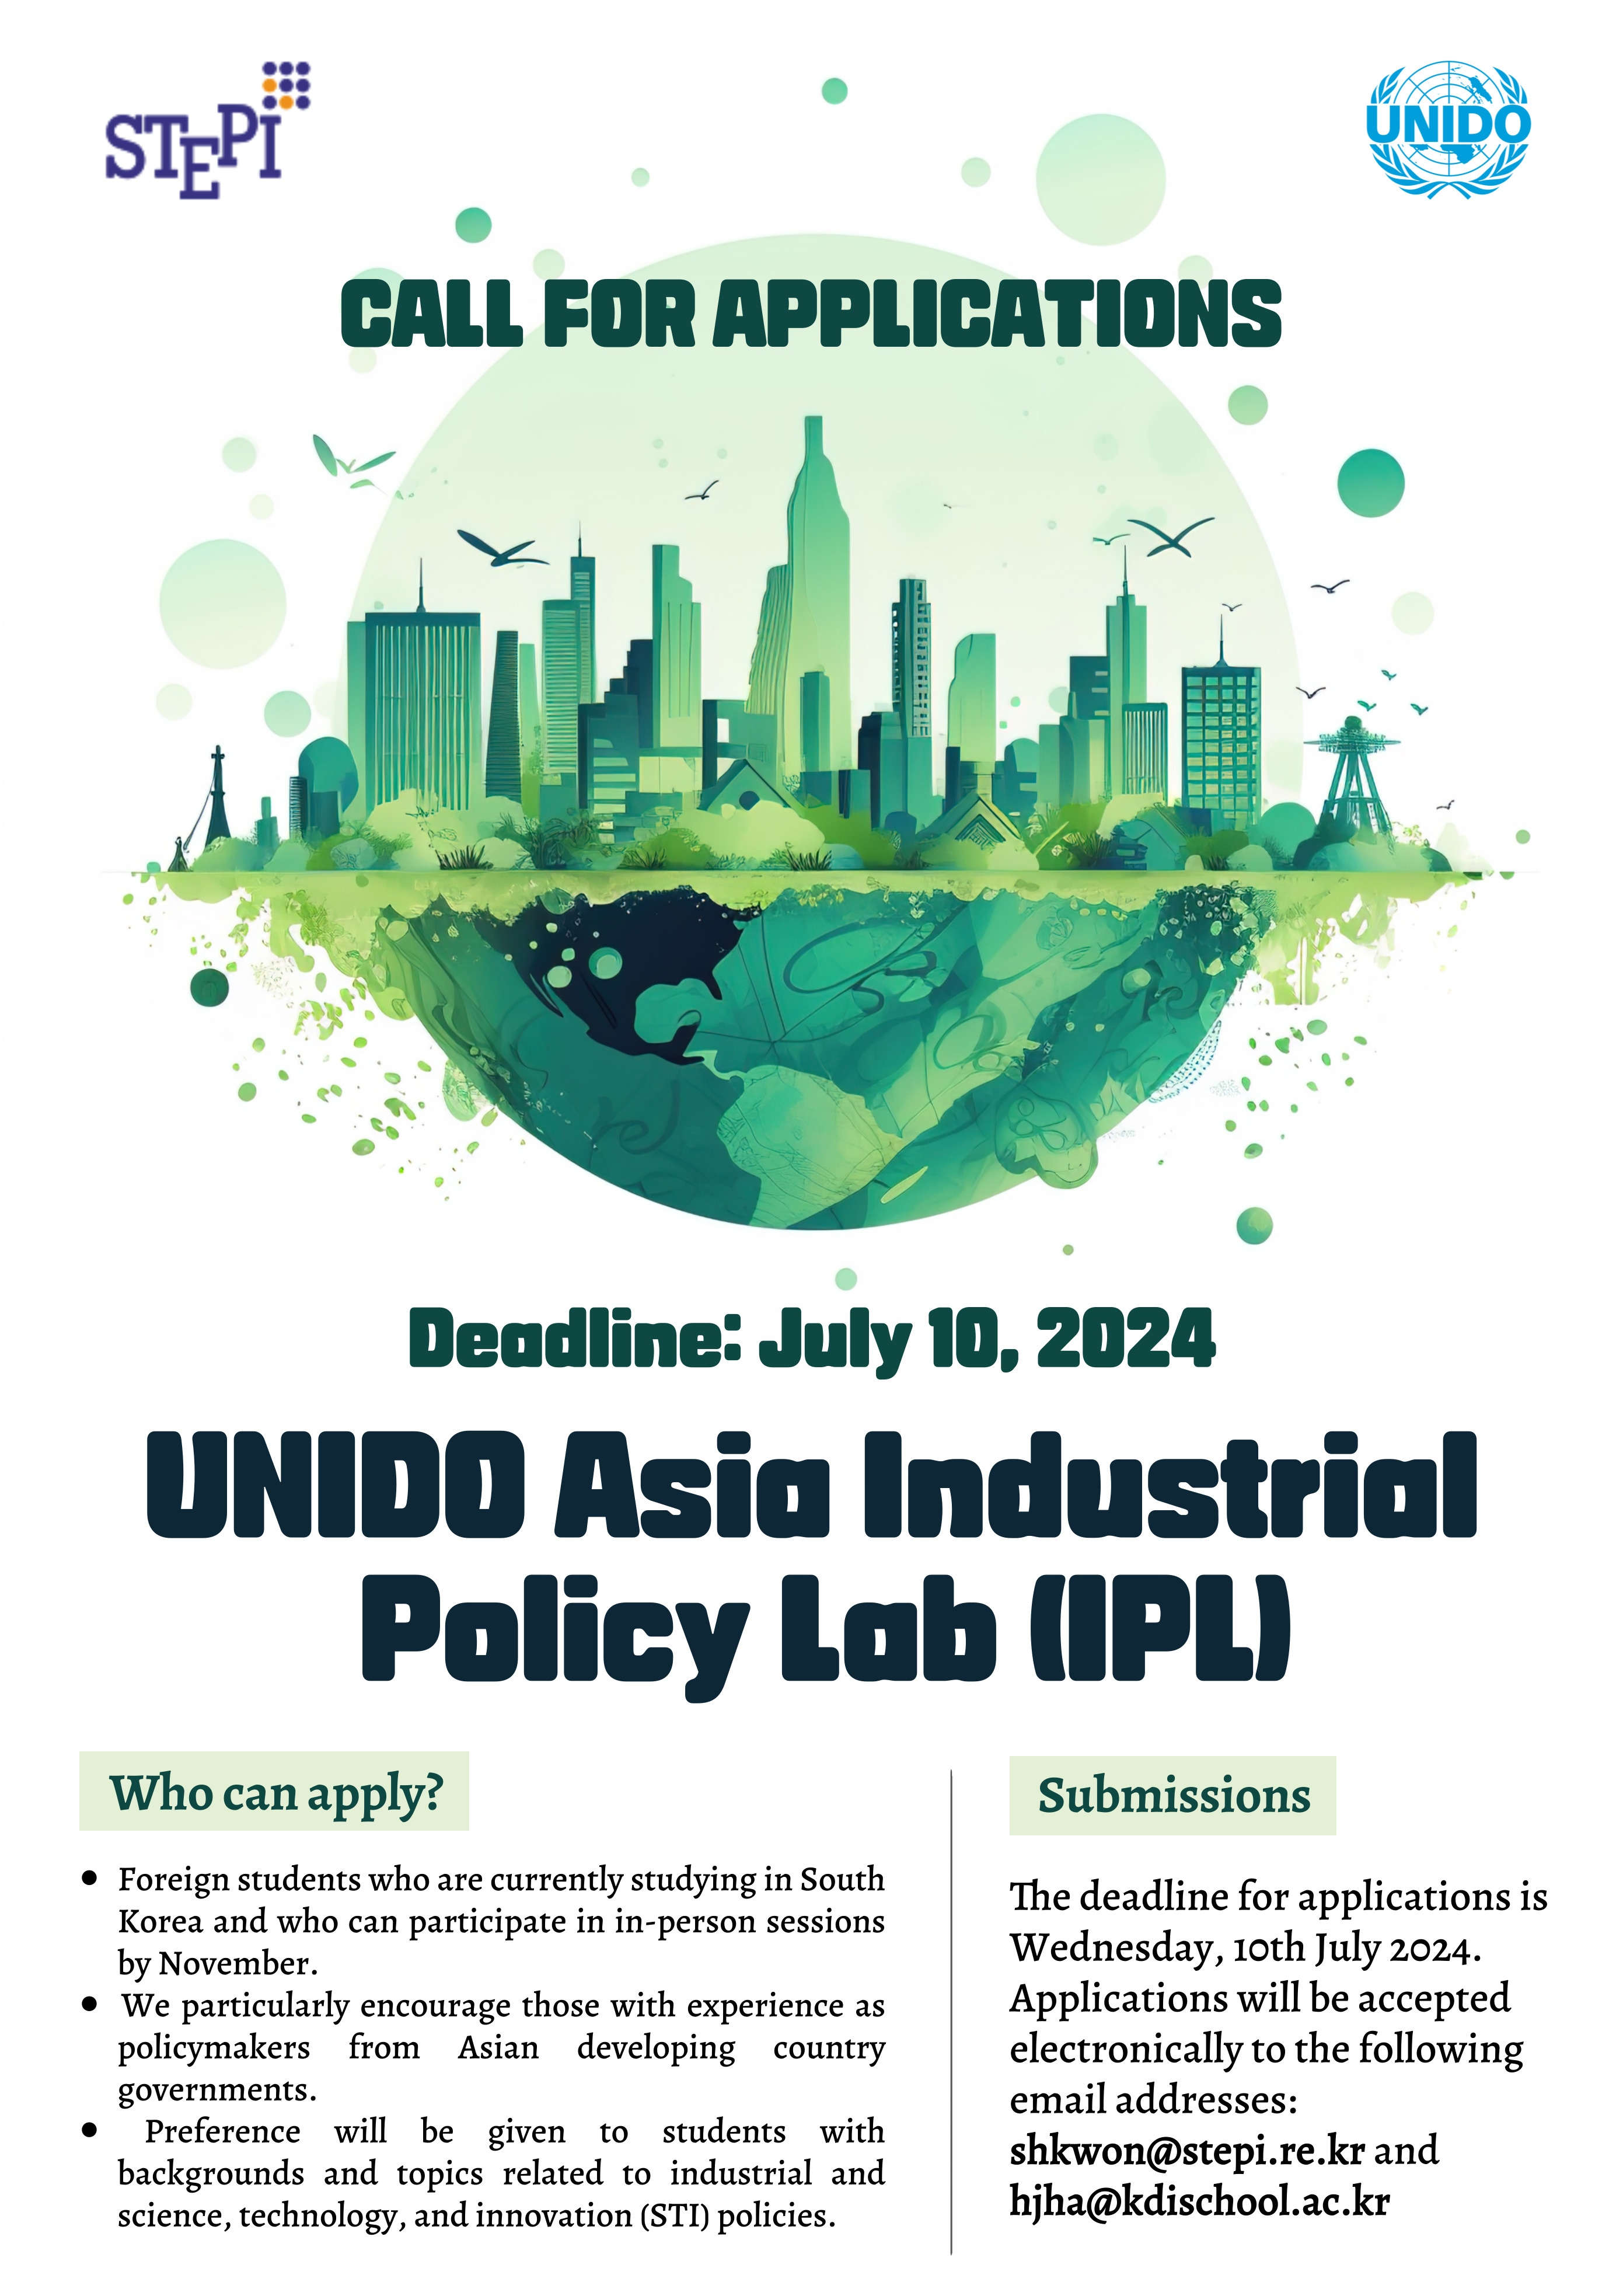 Call for Applications: UNIDO Asia Industrial Policy Lab (IPL)